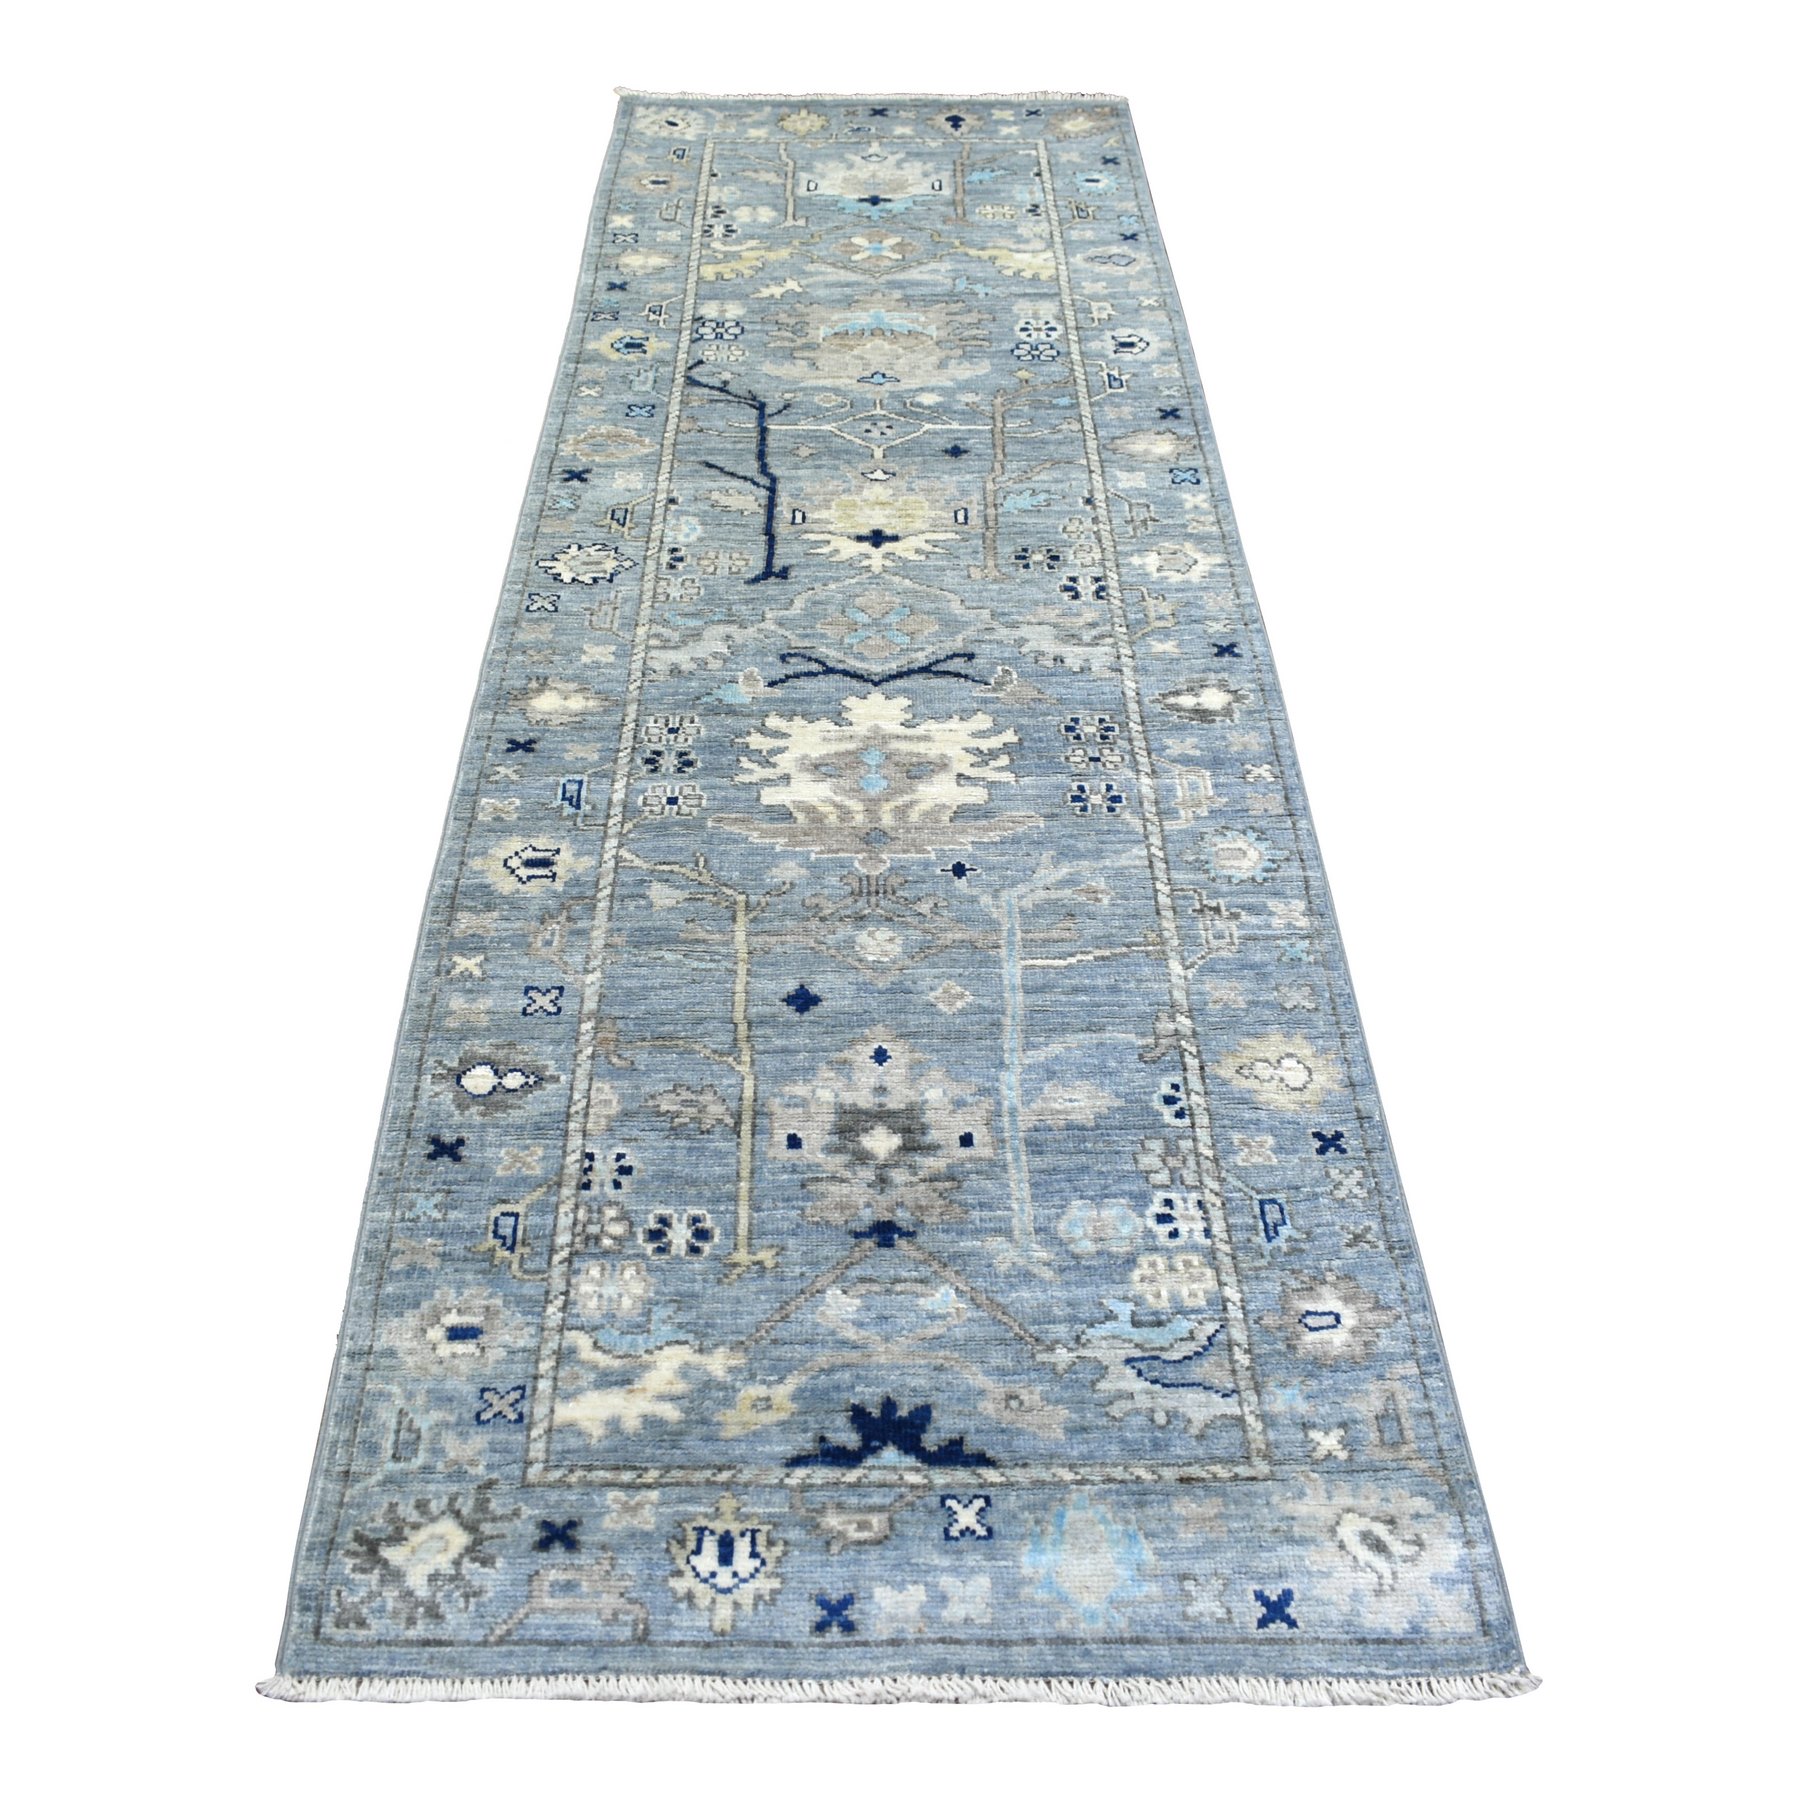 3'x9'6" Denim Blue Angora Ushak Natural Dyes, Flowing And Open Design, Afghan Wool Hand Woven Oriental Rug 